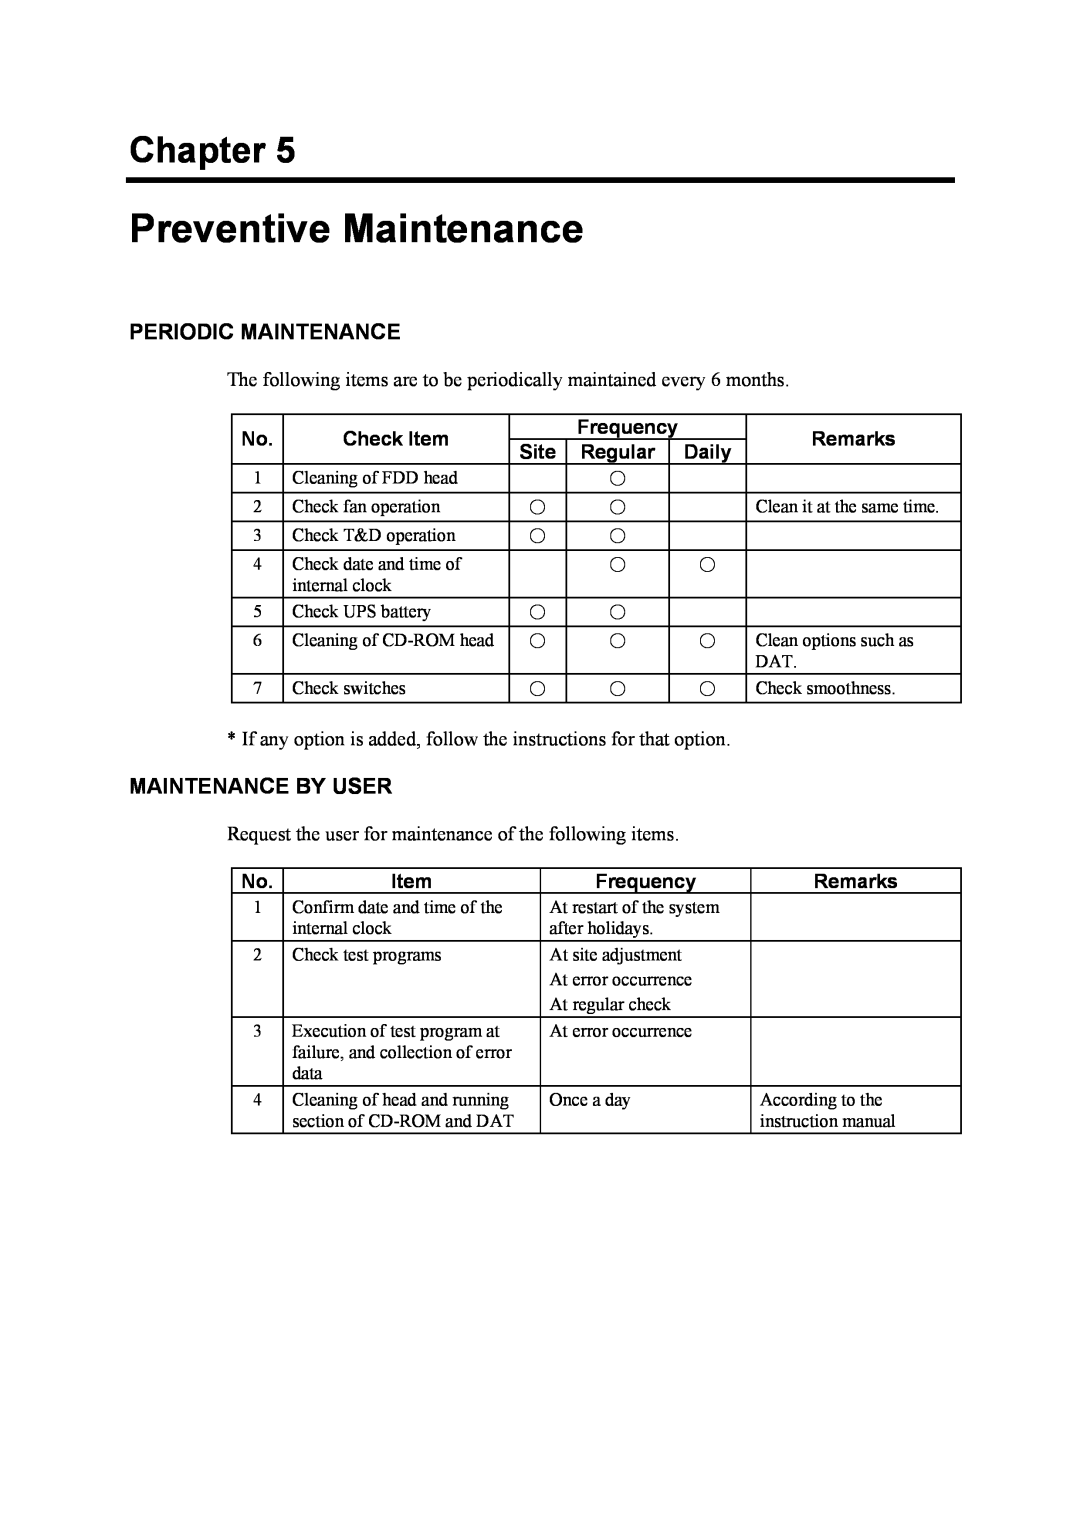 NEC 120Mf Preventive Maintenance, Periodic Maintenance, Maintenance By User, Chapter, Check Item, Frequency, Remarks, Site 